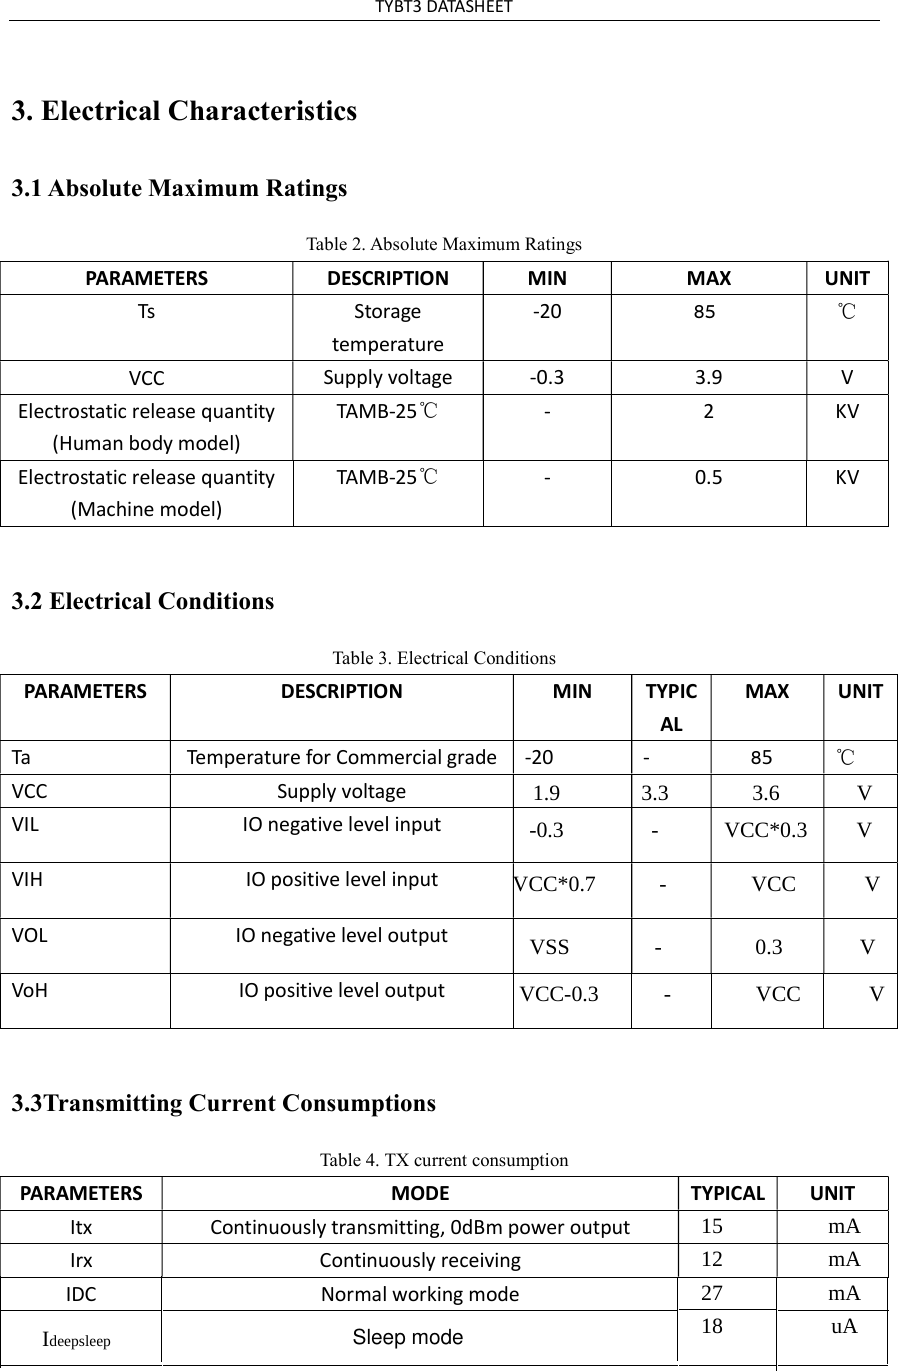 TYBT3 DATASHEET 3. Electrical Characteristics3.1 Absolute Maximum Ratings Table 2. Absolute Maximum Ratings PARAMETERS  DESCRIPTION  MIN  MAX  UNIT Ts  Storage temperature -20  85 ℃ VCC  Supply voltage  -0.3  3.9  V Electrostatic release quantity (Human body model) TAMB-25℃ -  2  KV Electrostatic release quantity (Machine model) TAMB-25℃ -  0.5  KV 3.2 Electrical Conditions Table 3. Electrical Conditions PARAMETERS  DESCRIPTION  MIN  TYPICAL MAX  UNIT Ta  Temperature for Commercial grade  -20  -  85  ℃ VCC  Supply voltage VIL  IO negative level inputVIH  IO positive level inputVOL  IO negative level outputVoH  IO positive level output3.3Transmitting Current Consumptions Table 4. TX current consumption PARAMETERS  MODE  TYPICAL  UNIT Itx  Continuously transmitting, 0dBm power outputIrx  Continuously receiving IDC  Normal working mode 1.9 3.3 3.6 V -0.3 - VCC*0.3 VVCC*0.7 -  VCC  V VSS -  0.3 V VCC-0.3 -  VCC V  15  mA 12 mA27 mA18 uAIdeepsleep Sleep mode